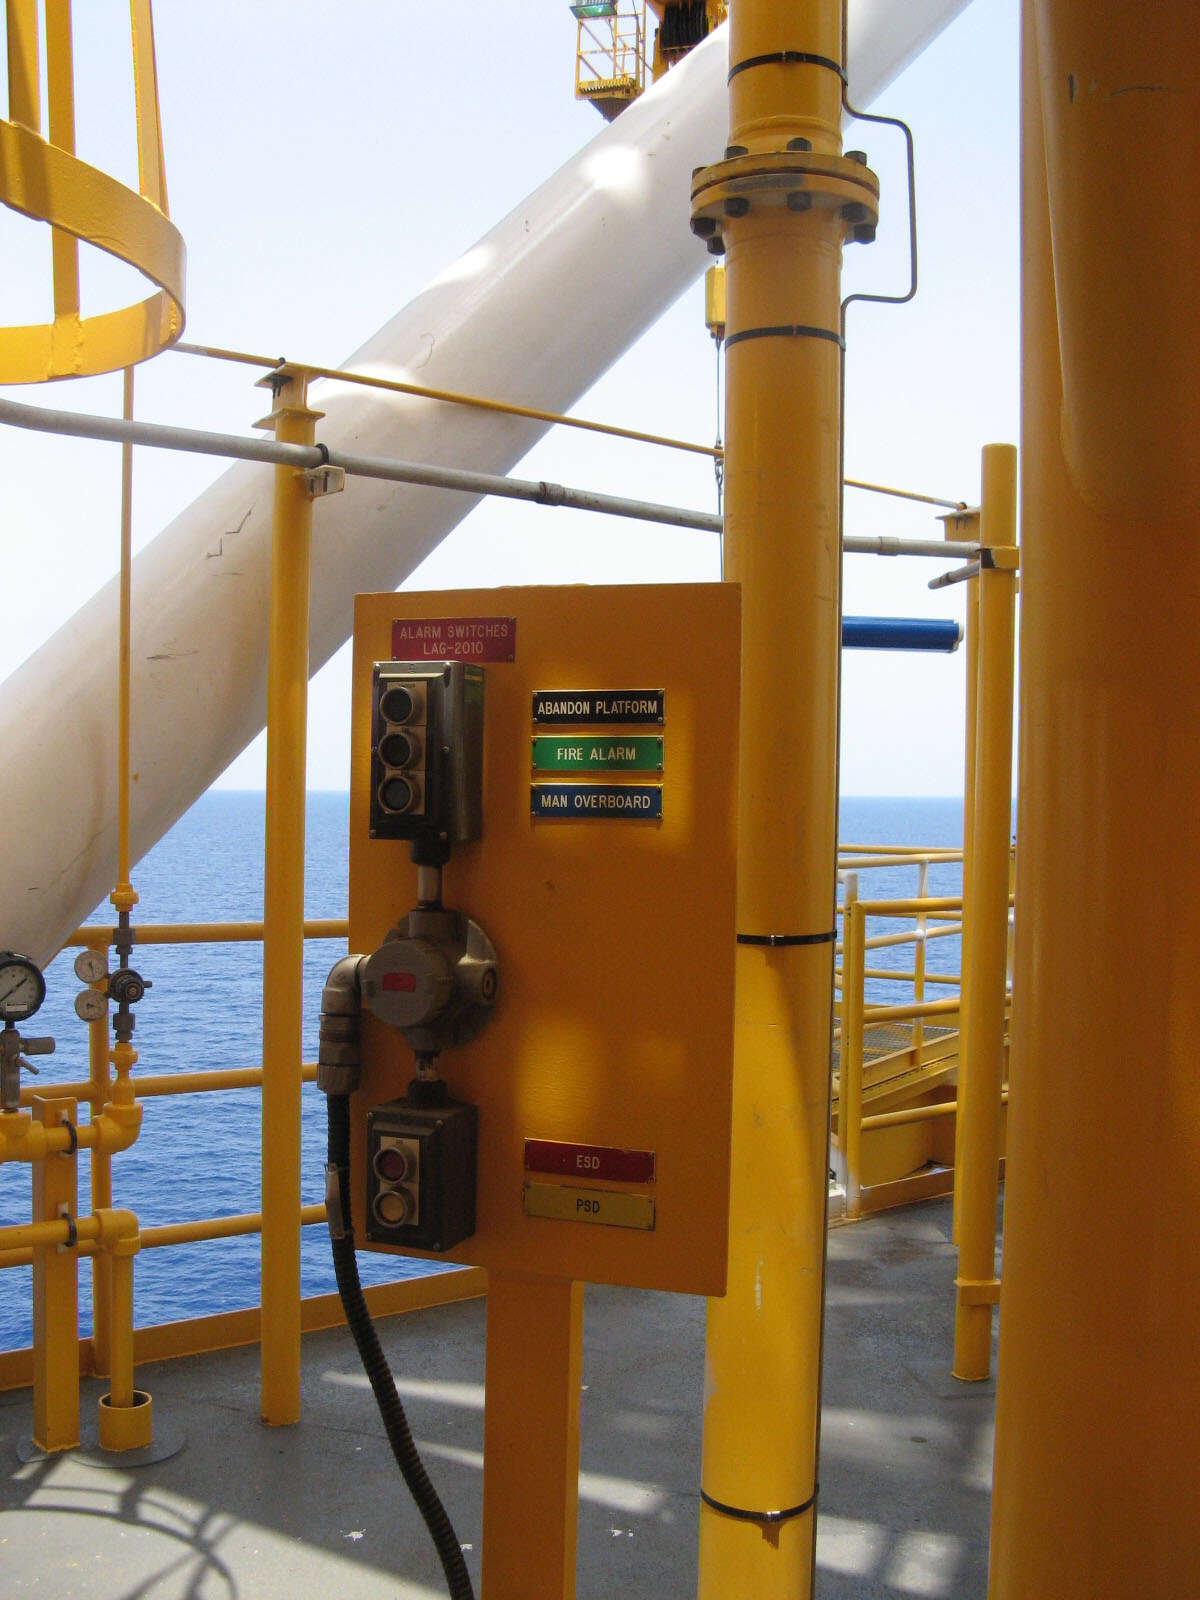 Alarm switches on the Independence Hub, a natural gas platform operated by Anadarko Petroleum Corp., in the Gulf of Mexico. Credit: Kristen Hays/Houston Chronicle